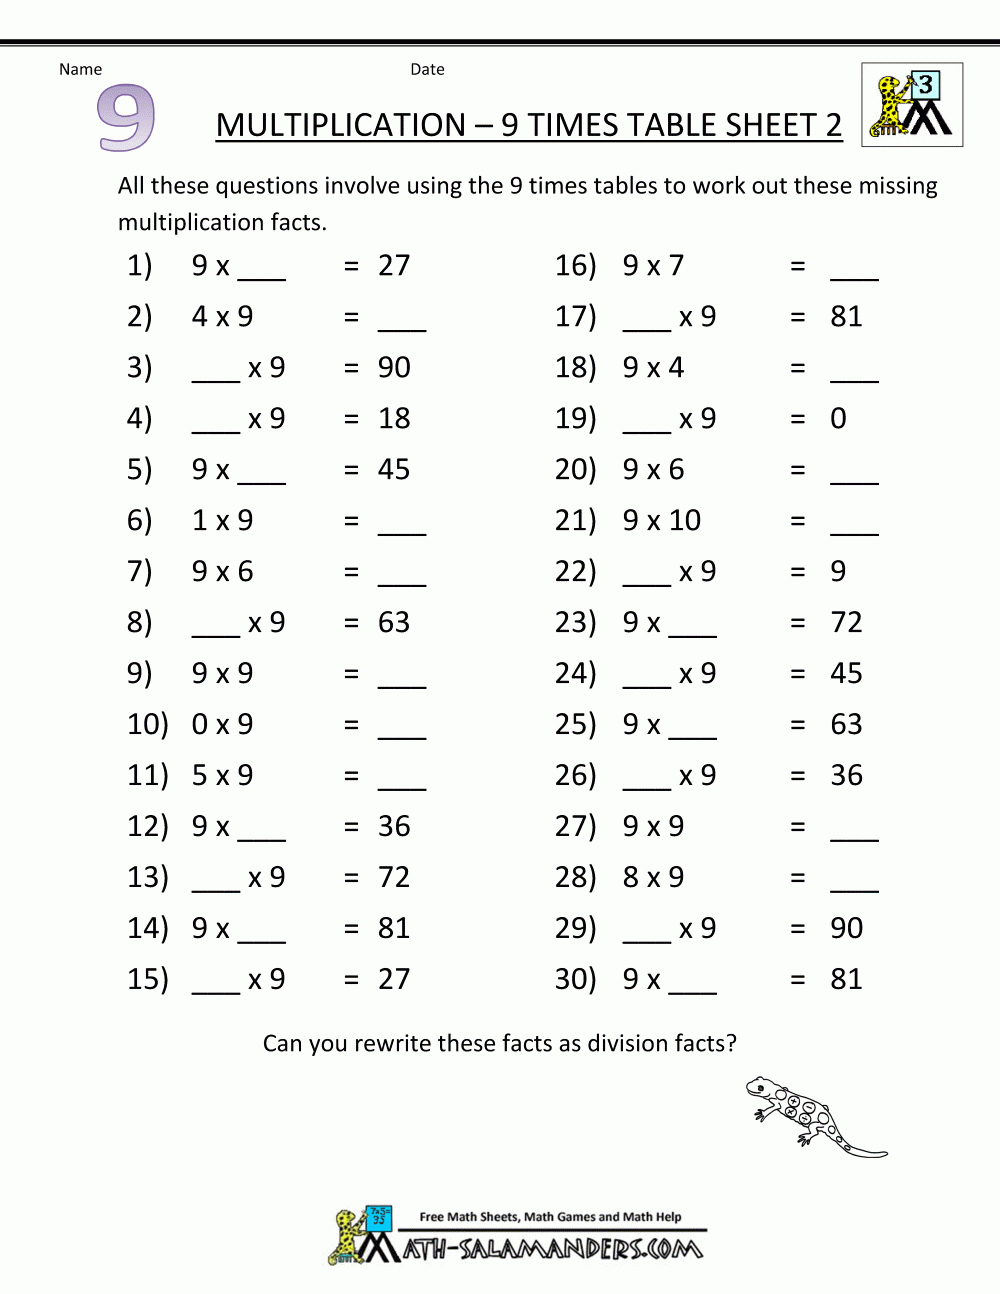 Printable Math Worksheets Multiplication 9 Times Table 2 intended for Multiplication Worksheets 9 Times Tables